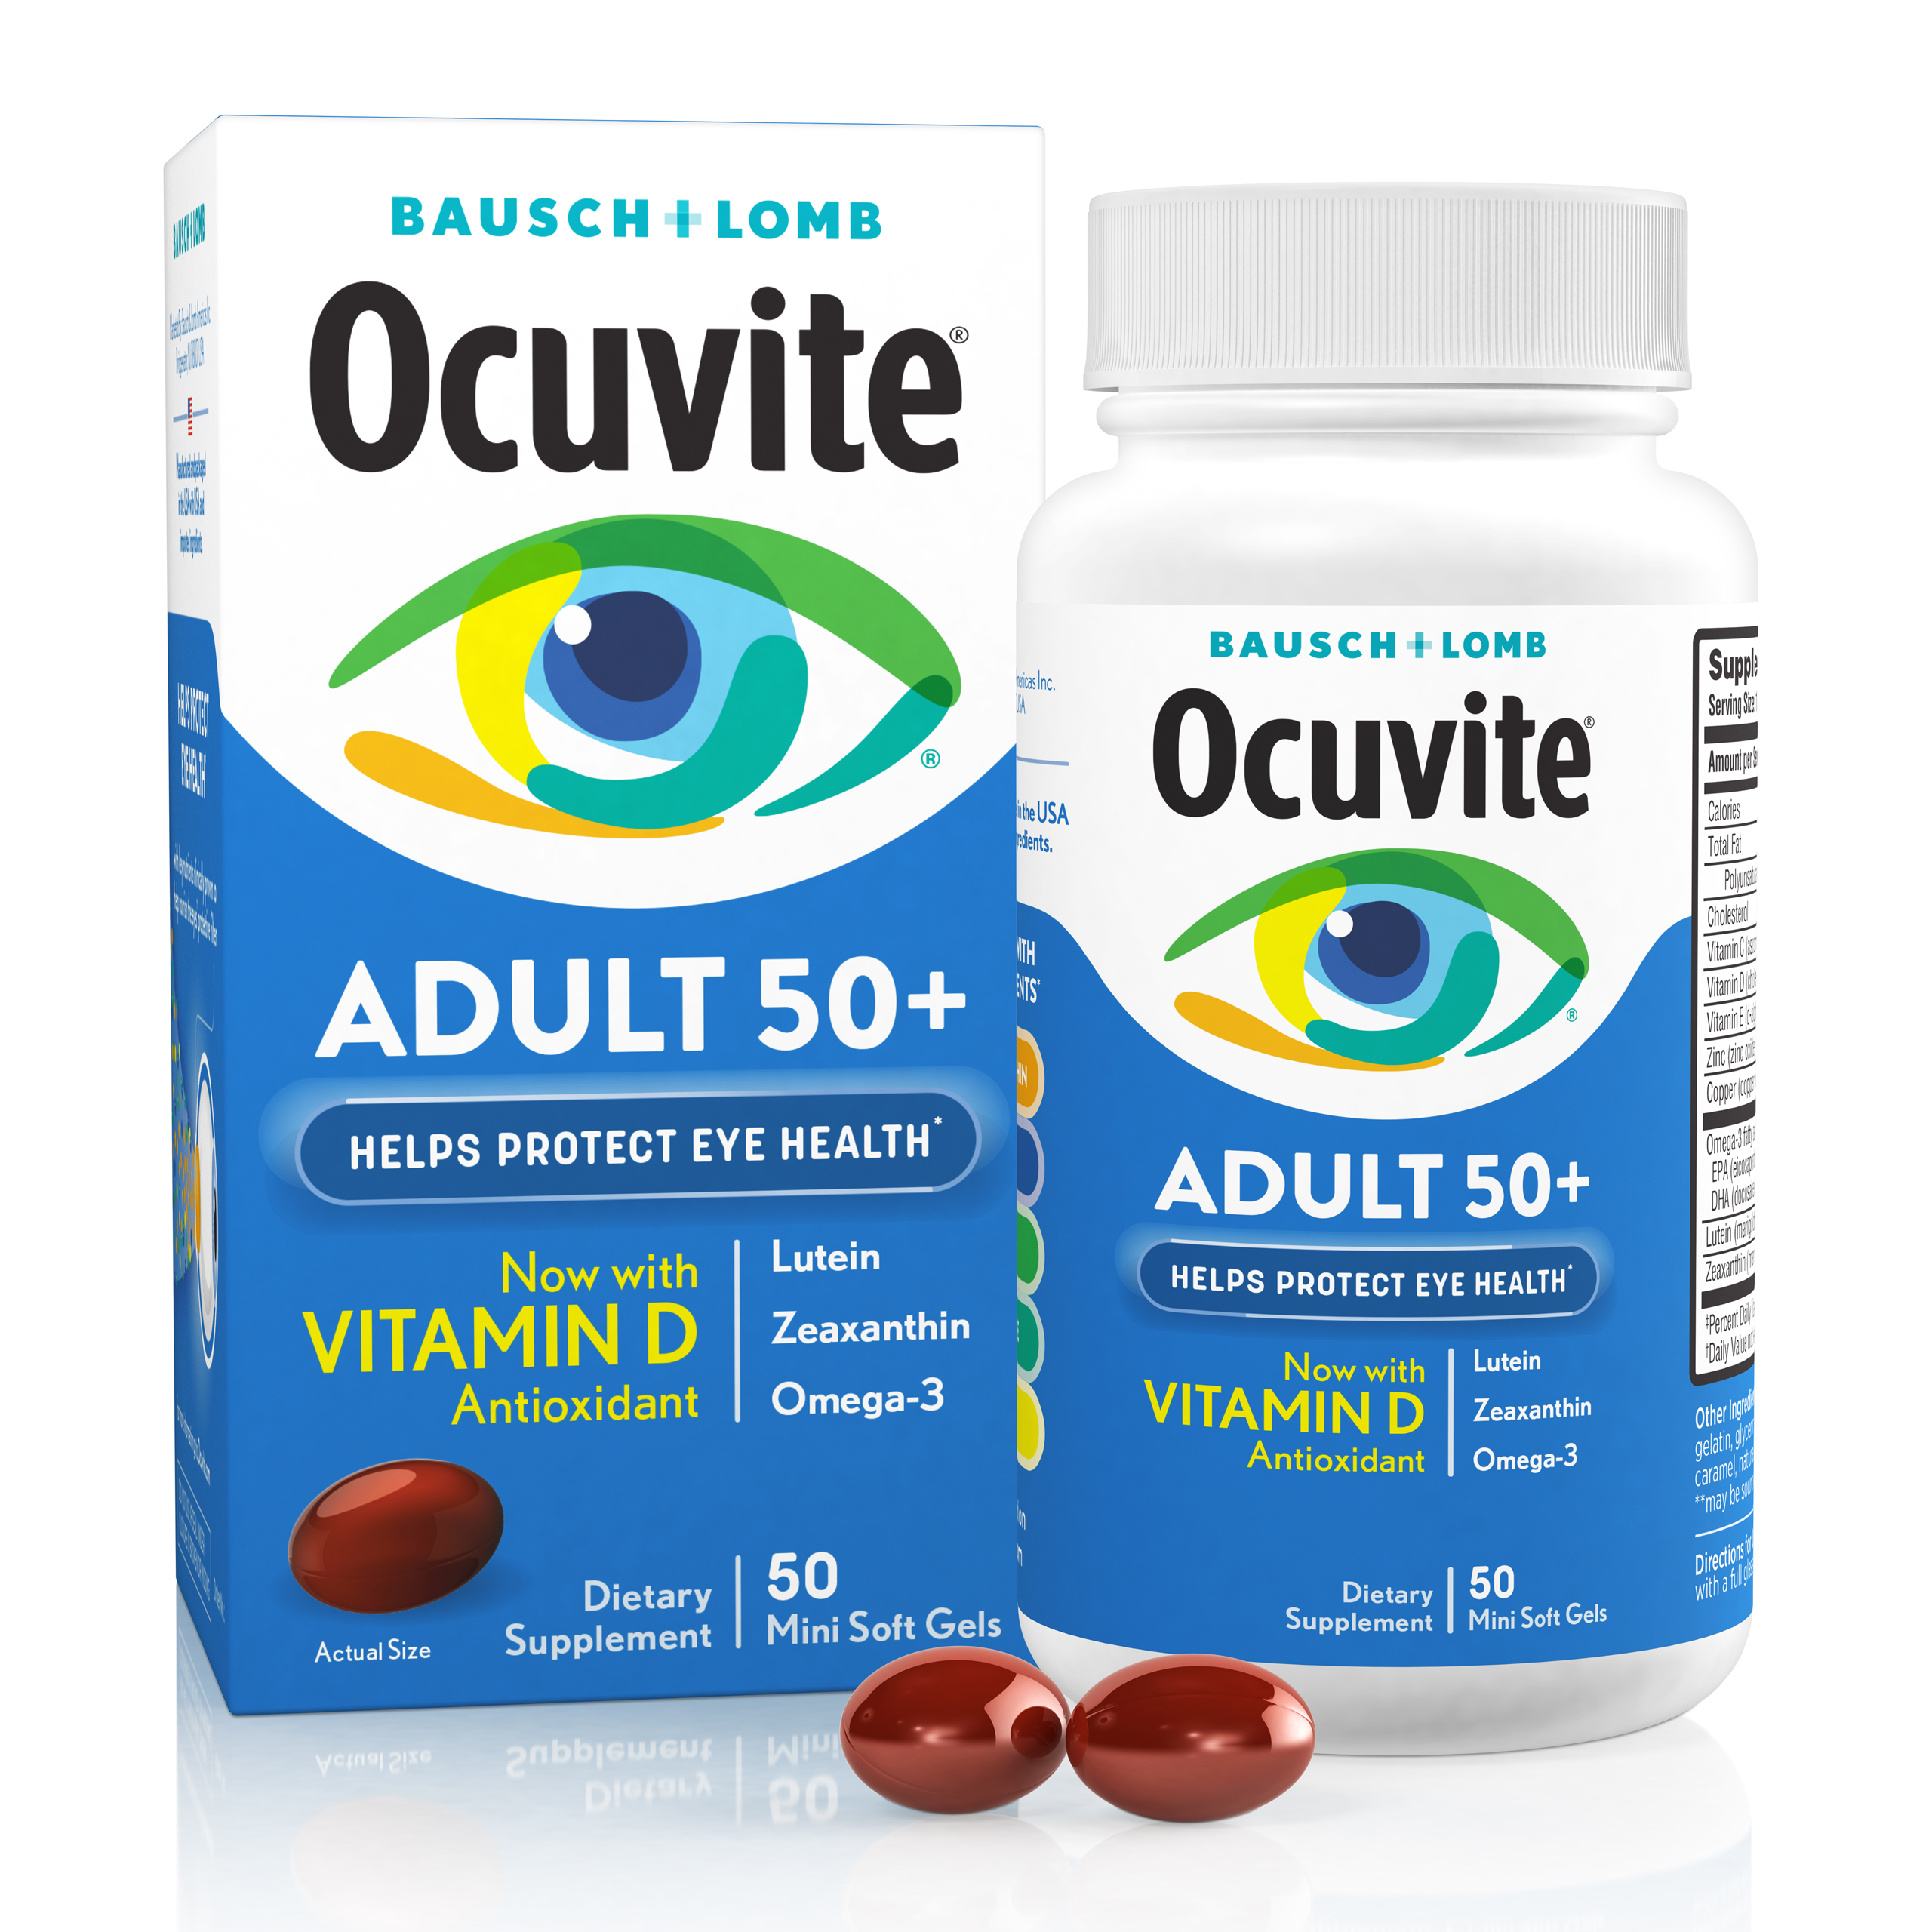 Ocuvite® Adult 50+ Eye Vitamins and Mineral Supplements, from Bausch + Lomb – 50 Soft Gels - image 1 of 9